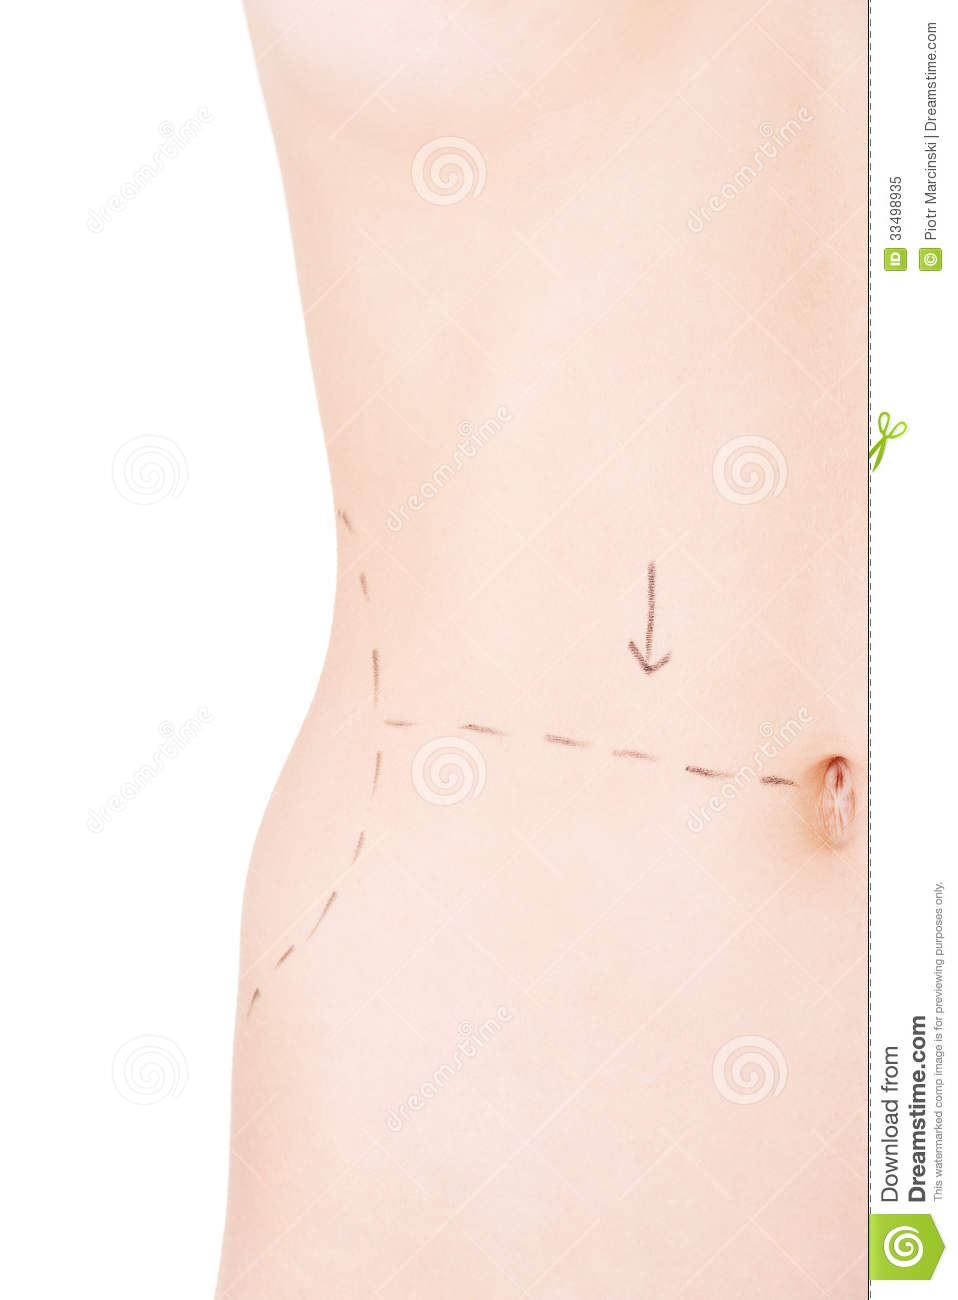 Woman Belly Marked Out For Cosmetic Surgery  Royalty Free Stock Photo